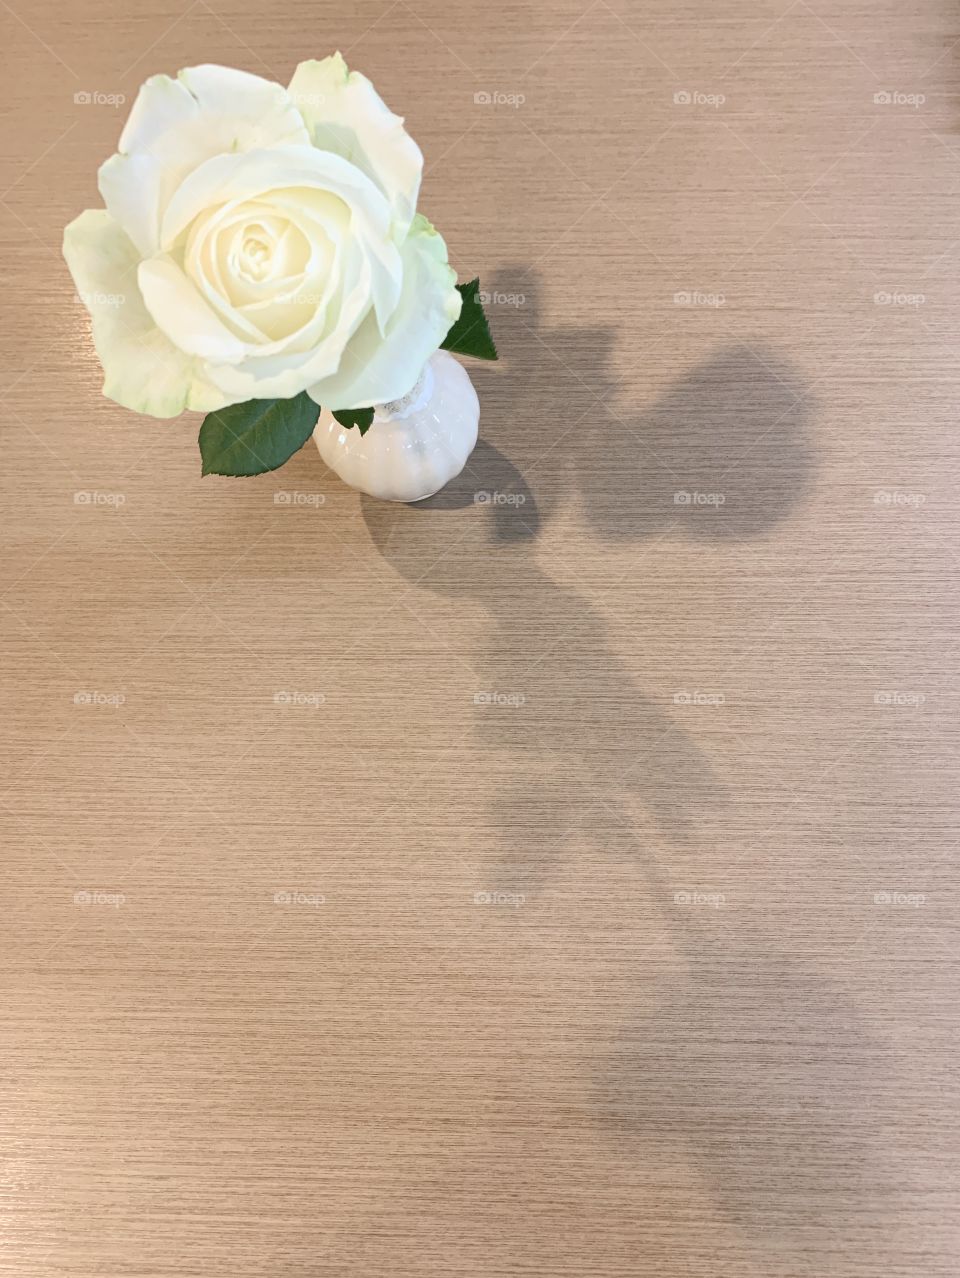 White rose on the wooden table